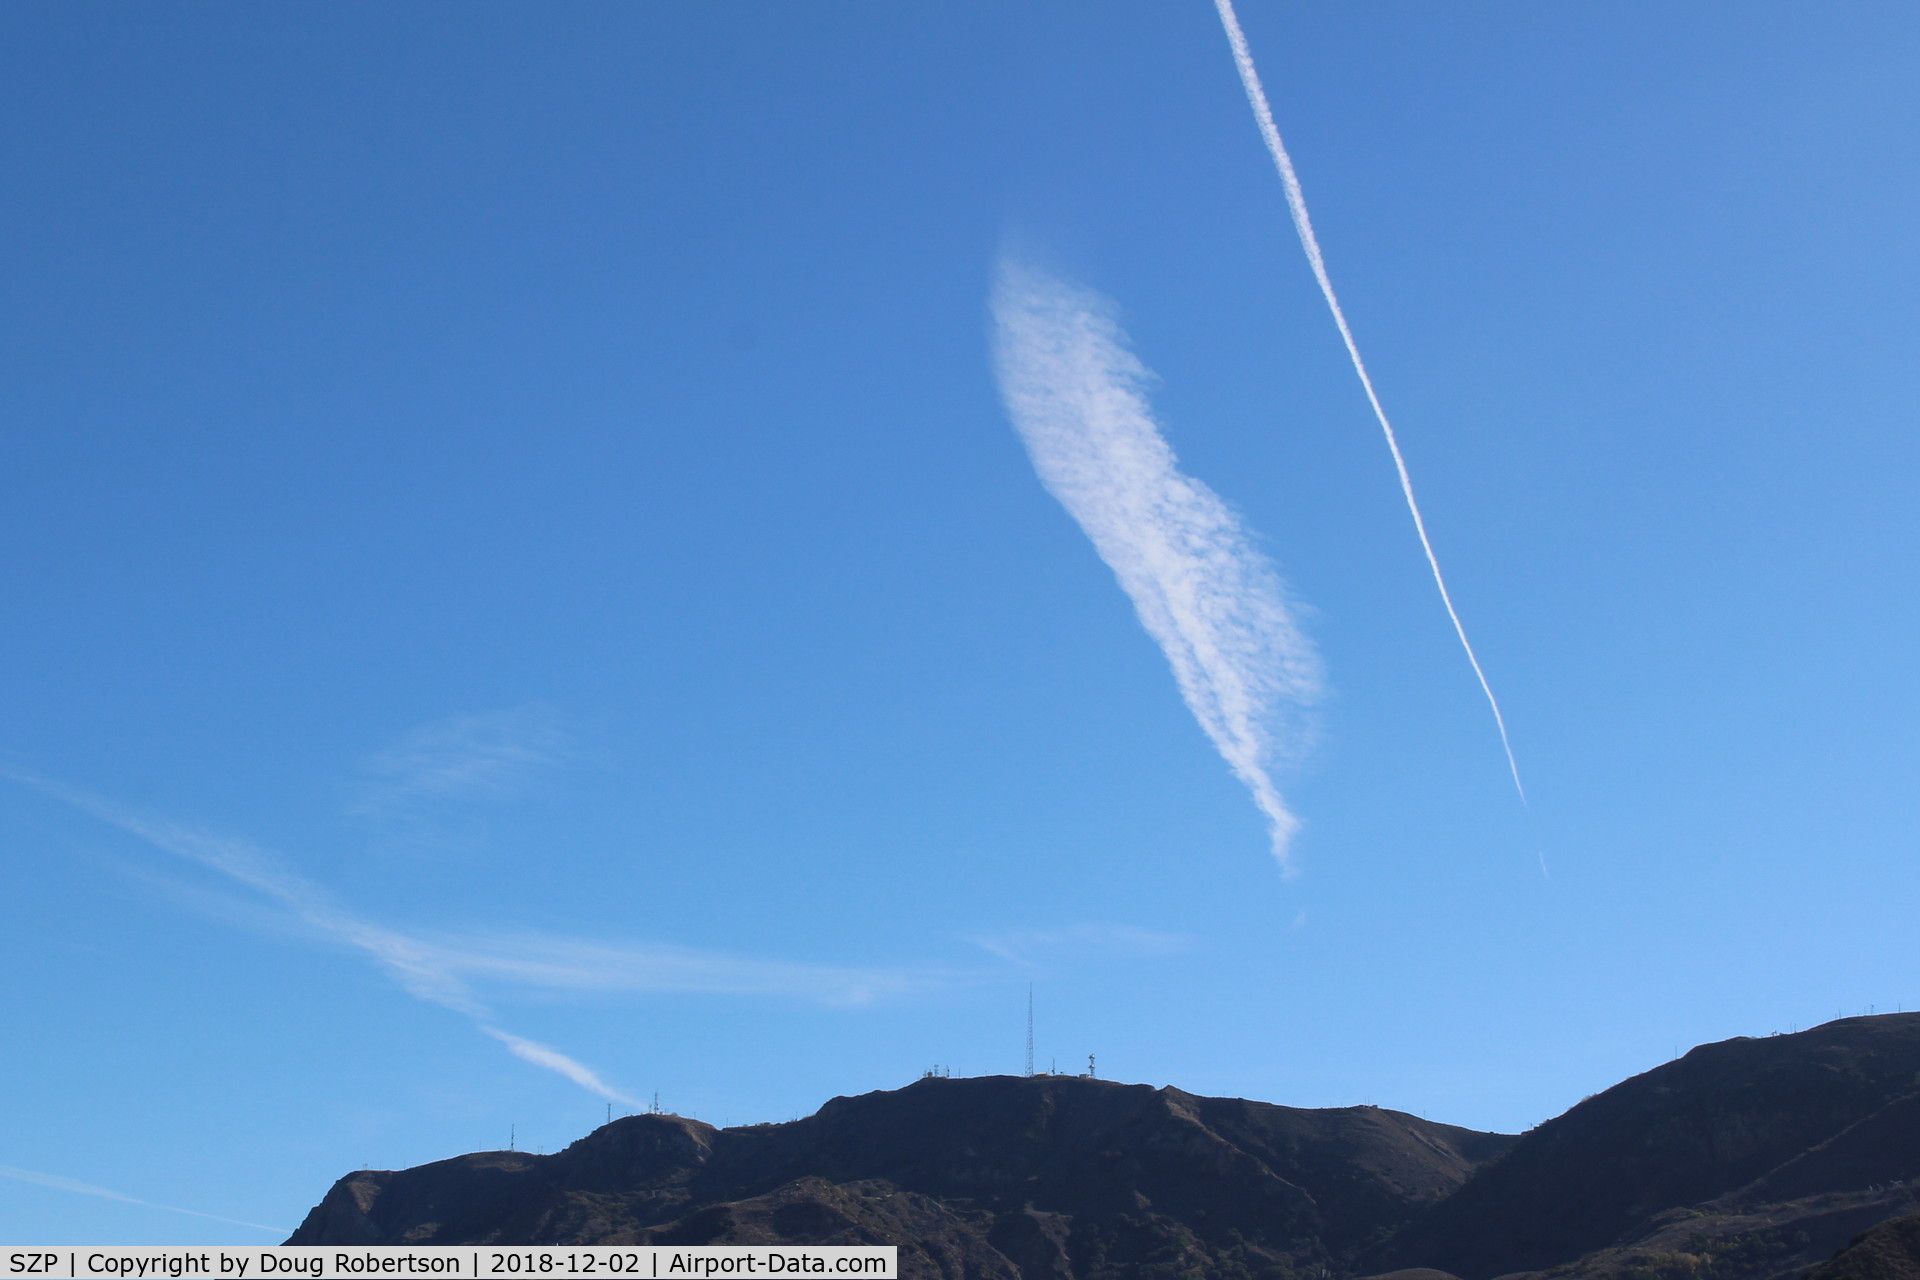 Santa Paula Airport (SZP) - Jet contrails over South Mountain of passenger jets enroute south-east bound to KLAX, Los Angeles International Airport